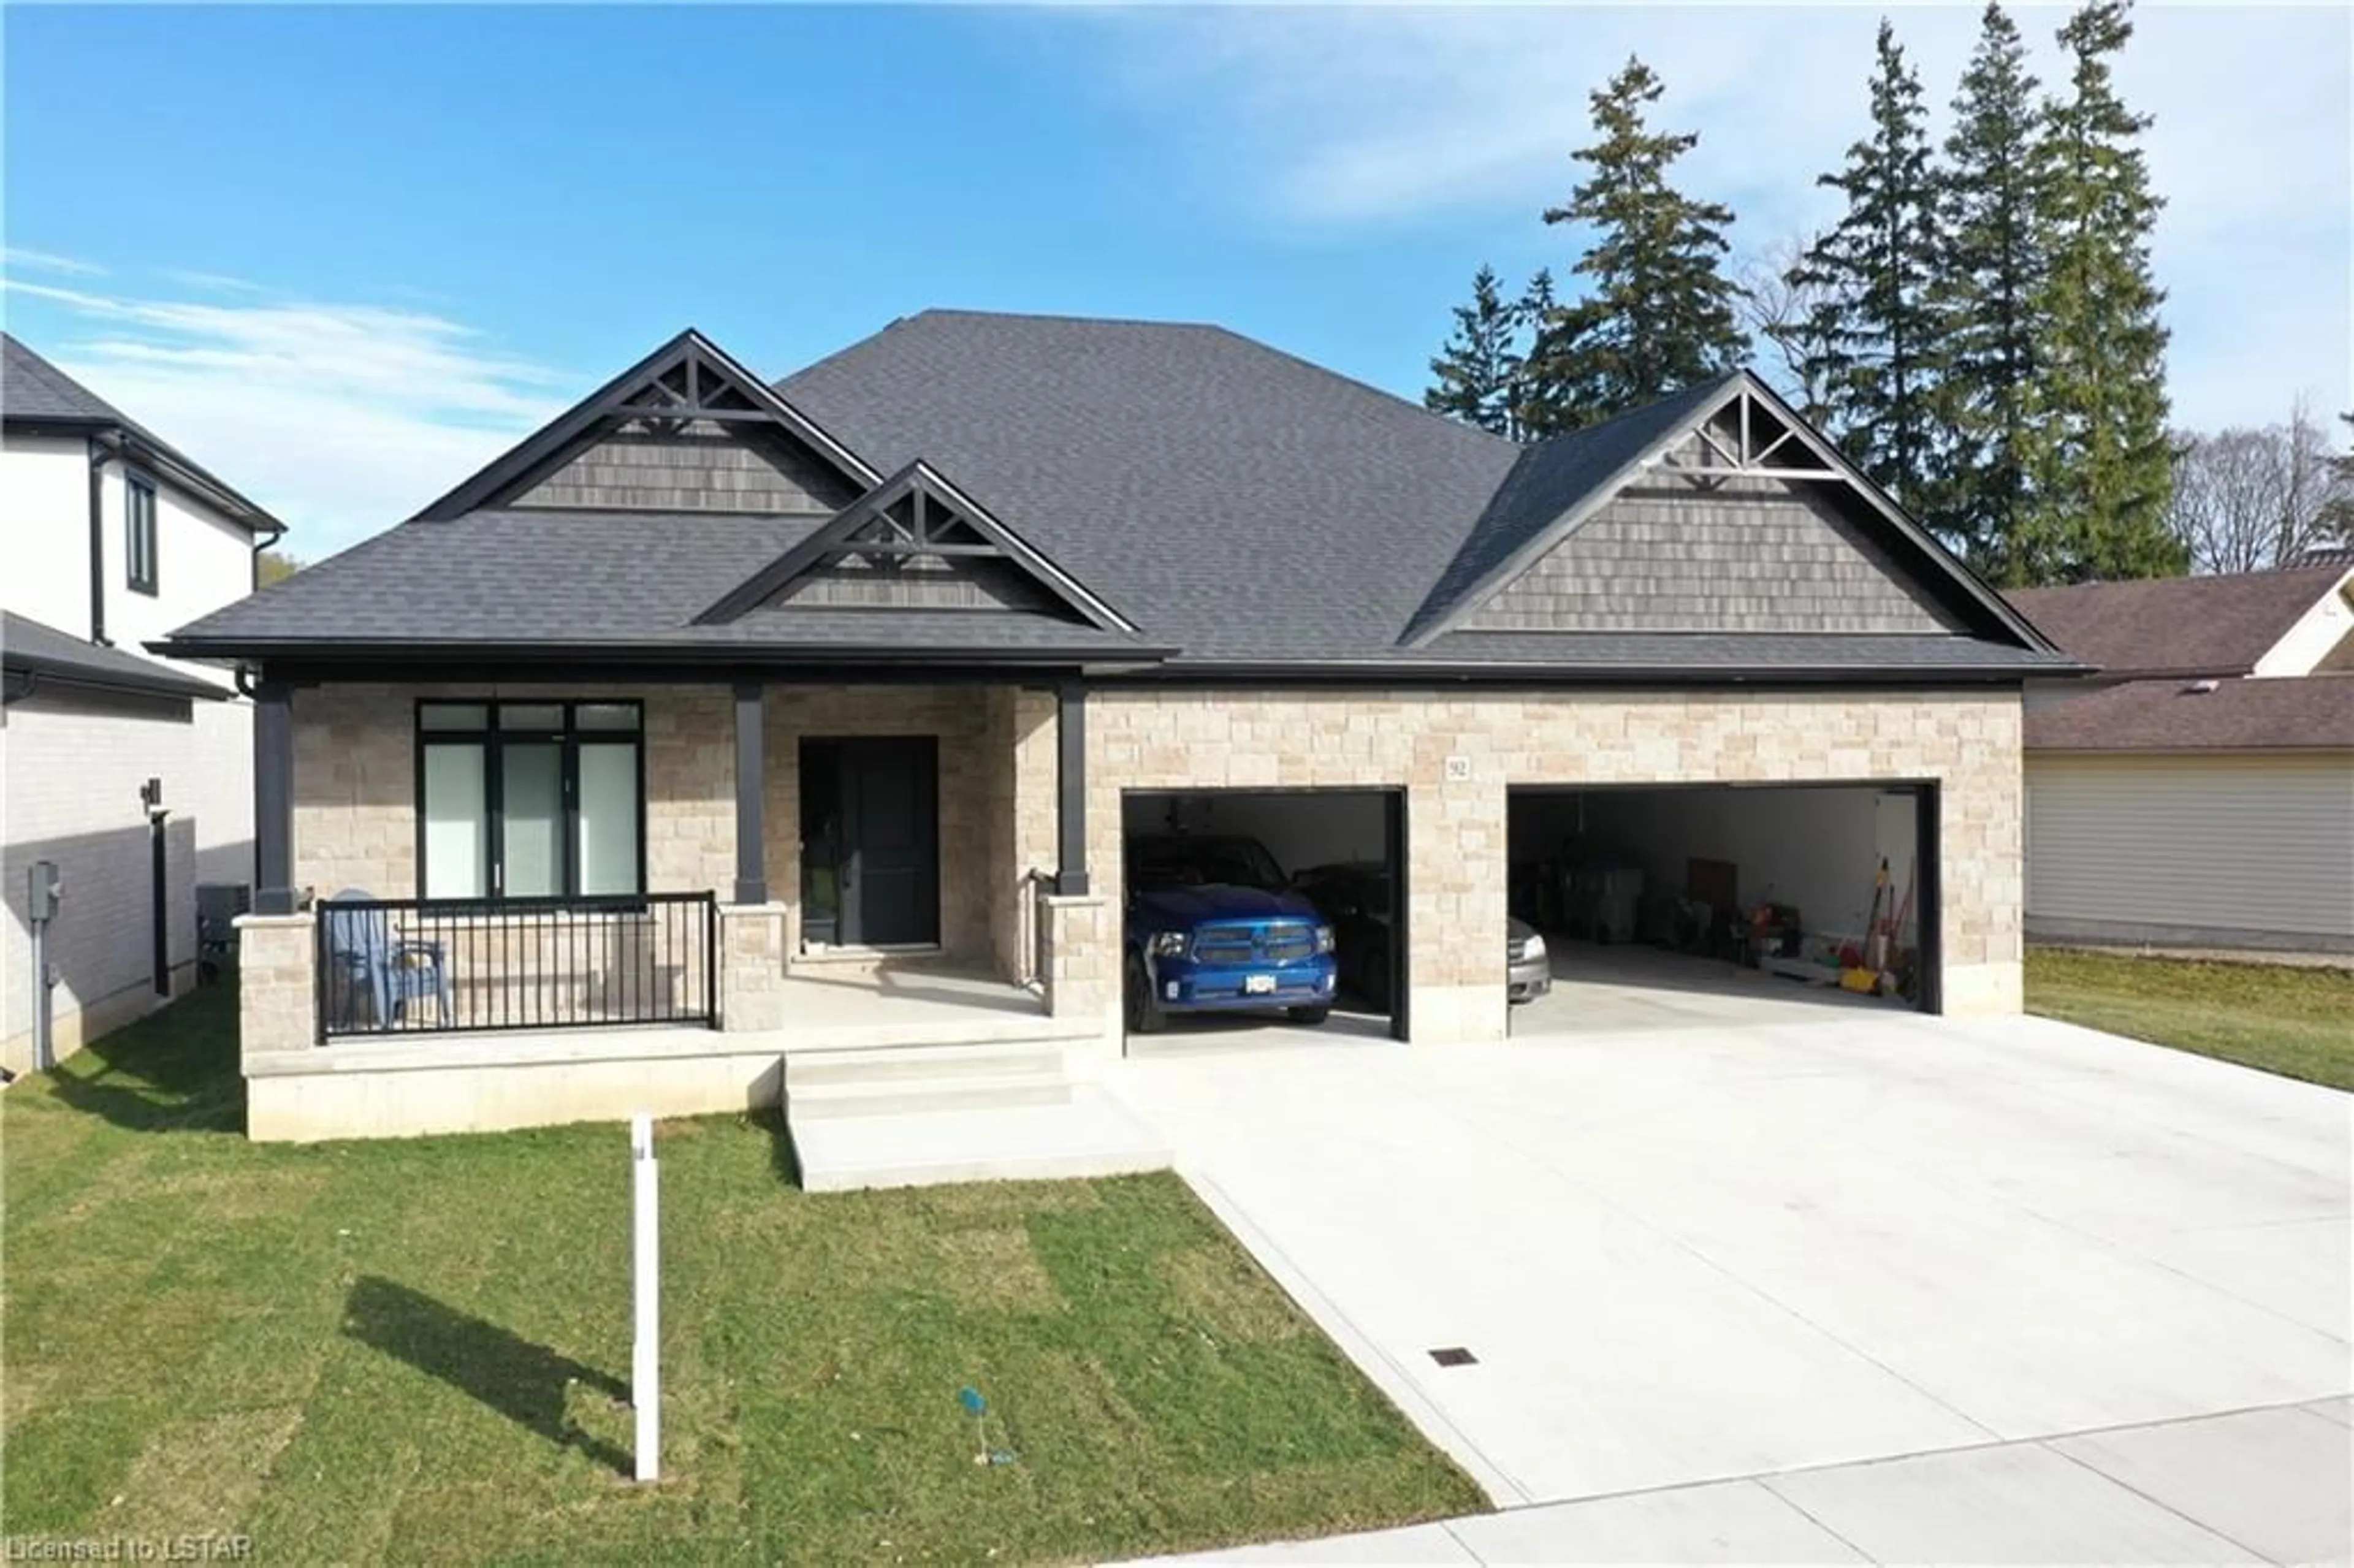 Home with brick exterior material for 92 Queen St, Ailsa Craig Ontario N0M 1A0